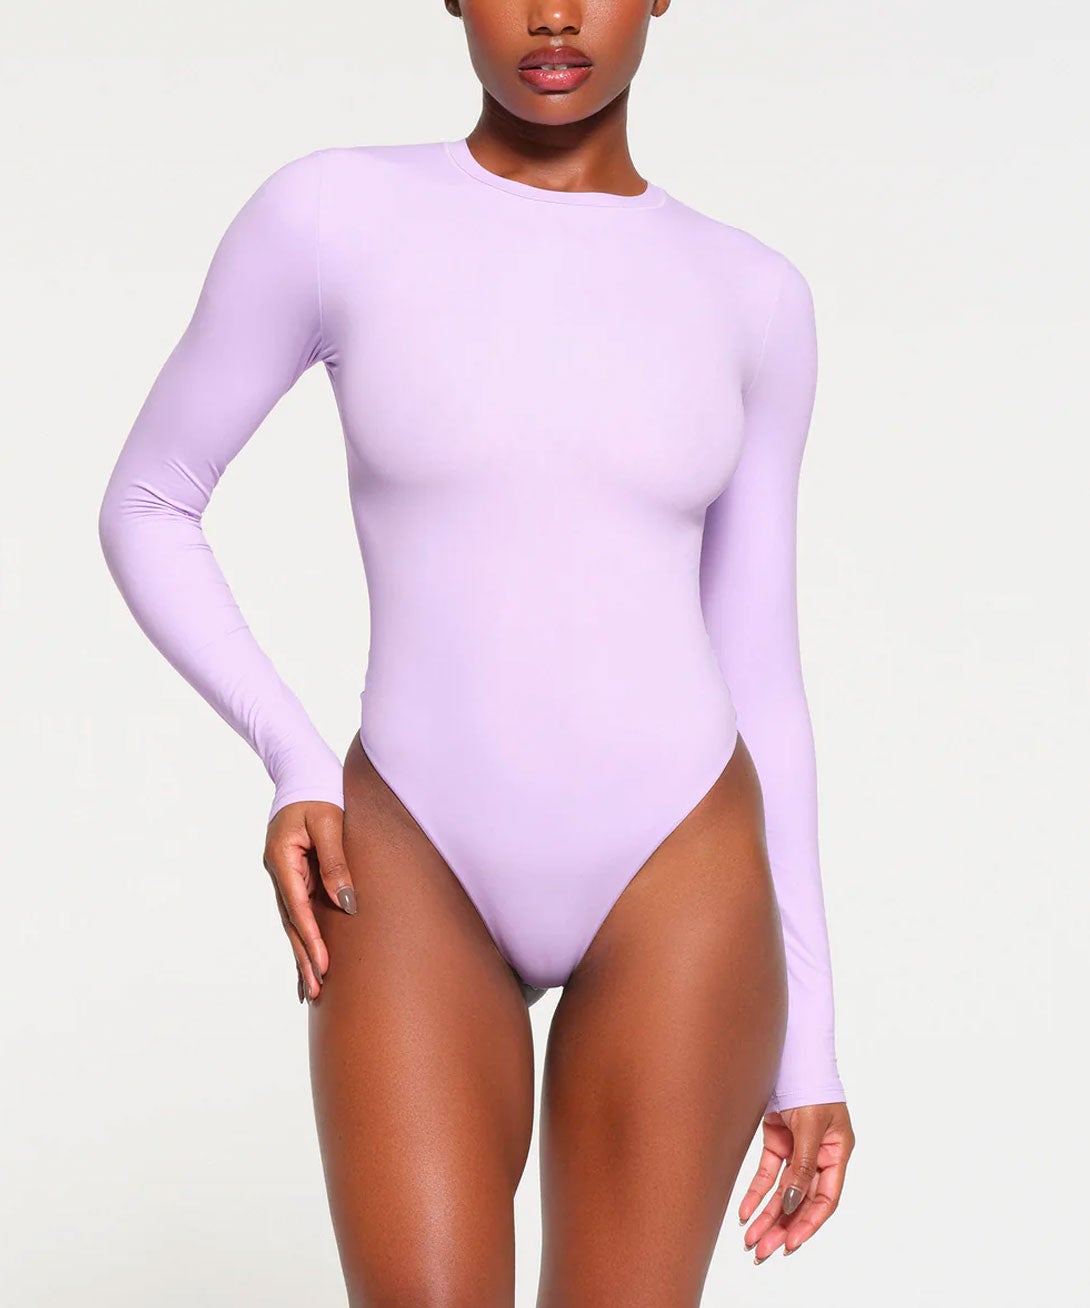 Skims Summer Mesh Strappy Bodysuit COLOR Lilac Swirl SIZE 2X BS